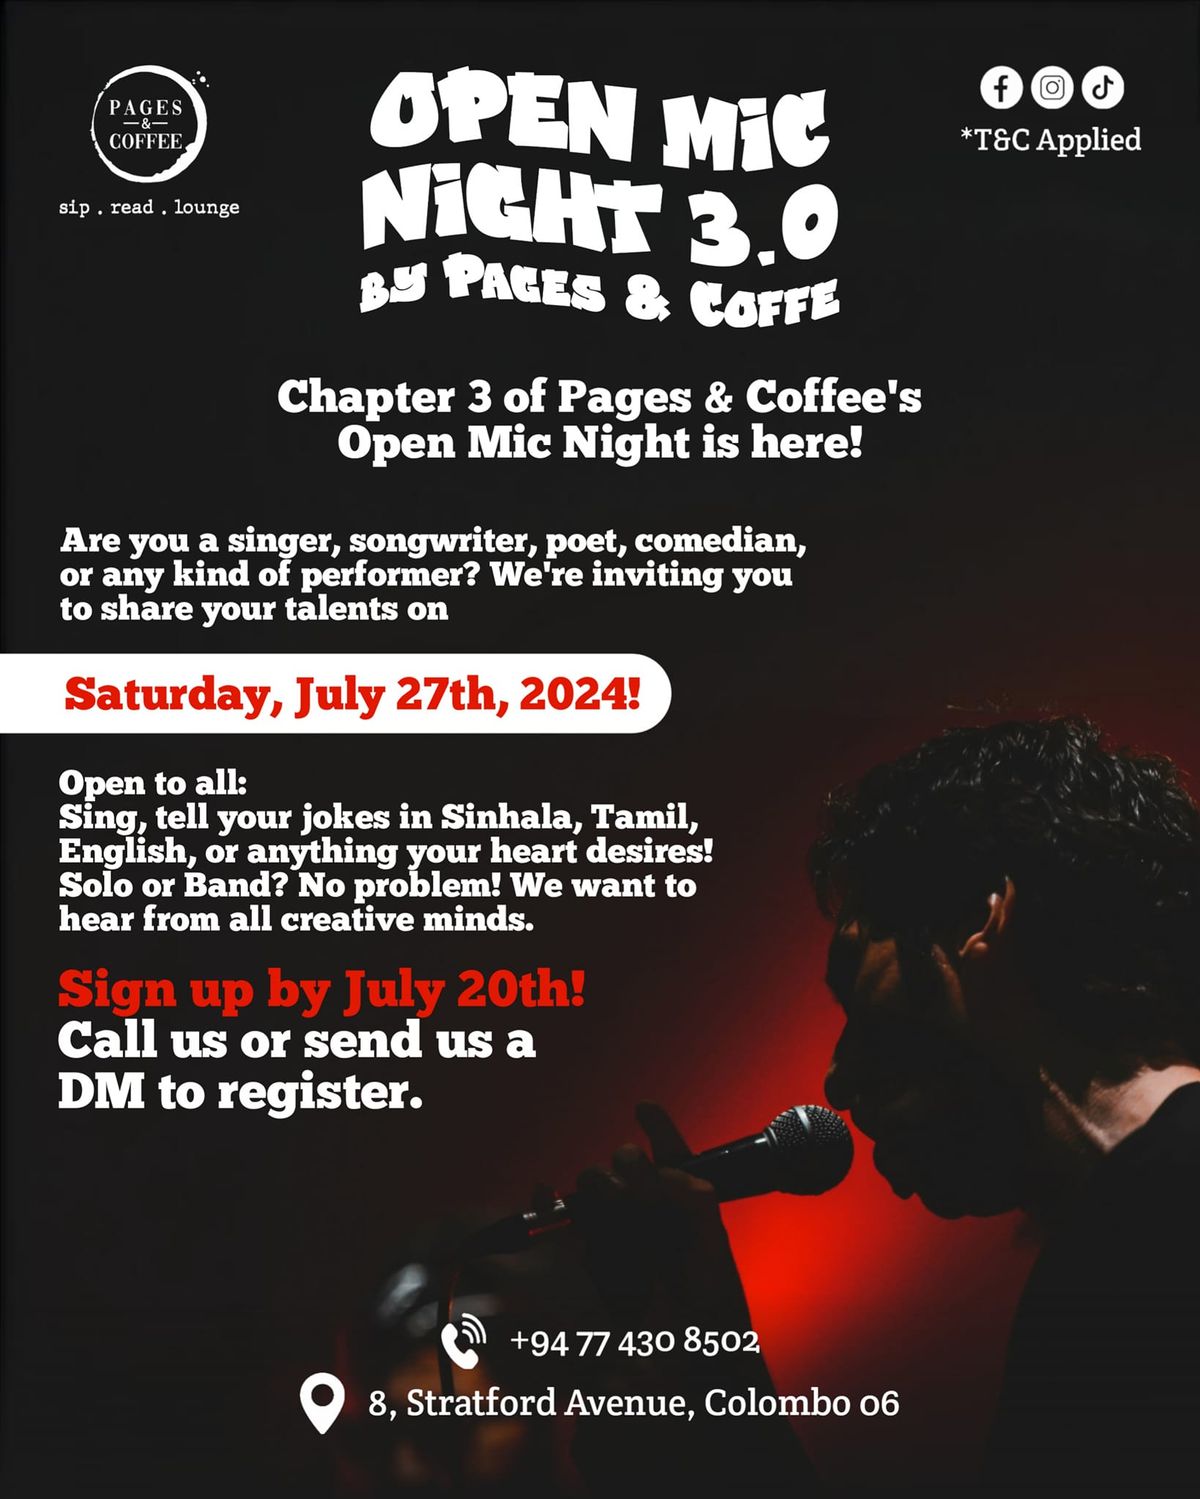 Pages & Coffee's Open Mic Night 3.0